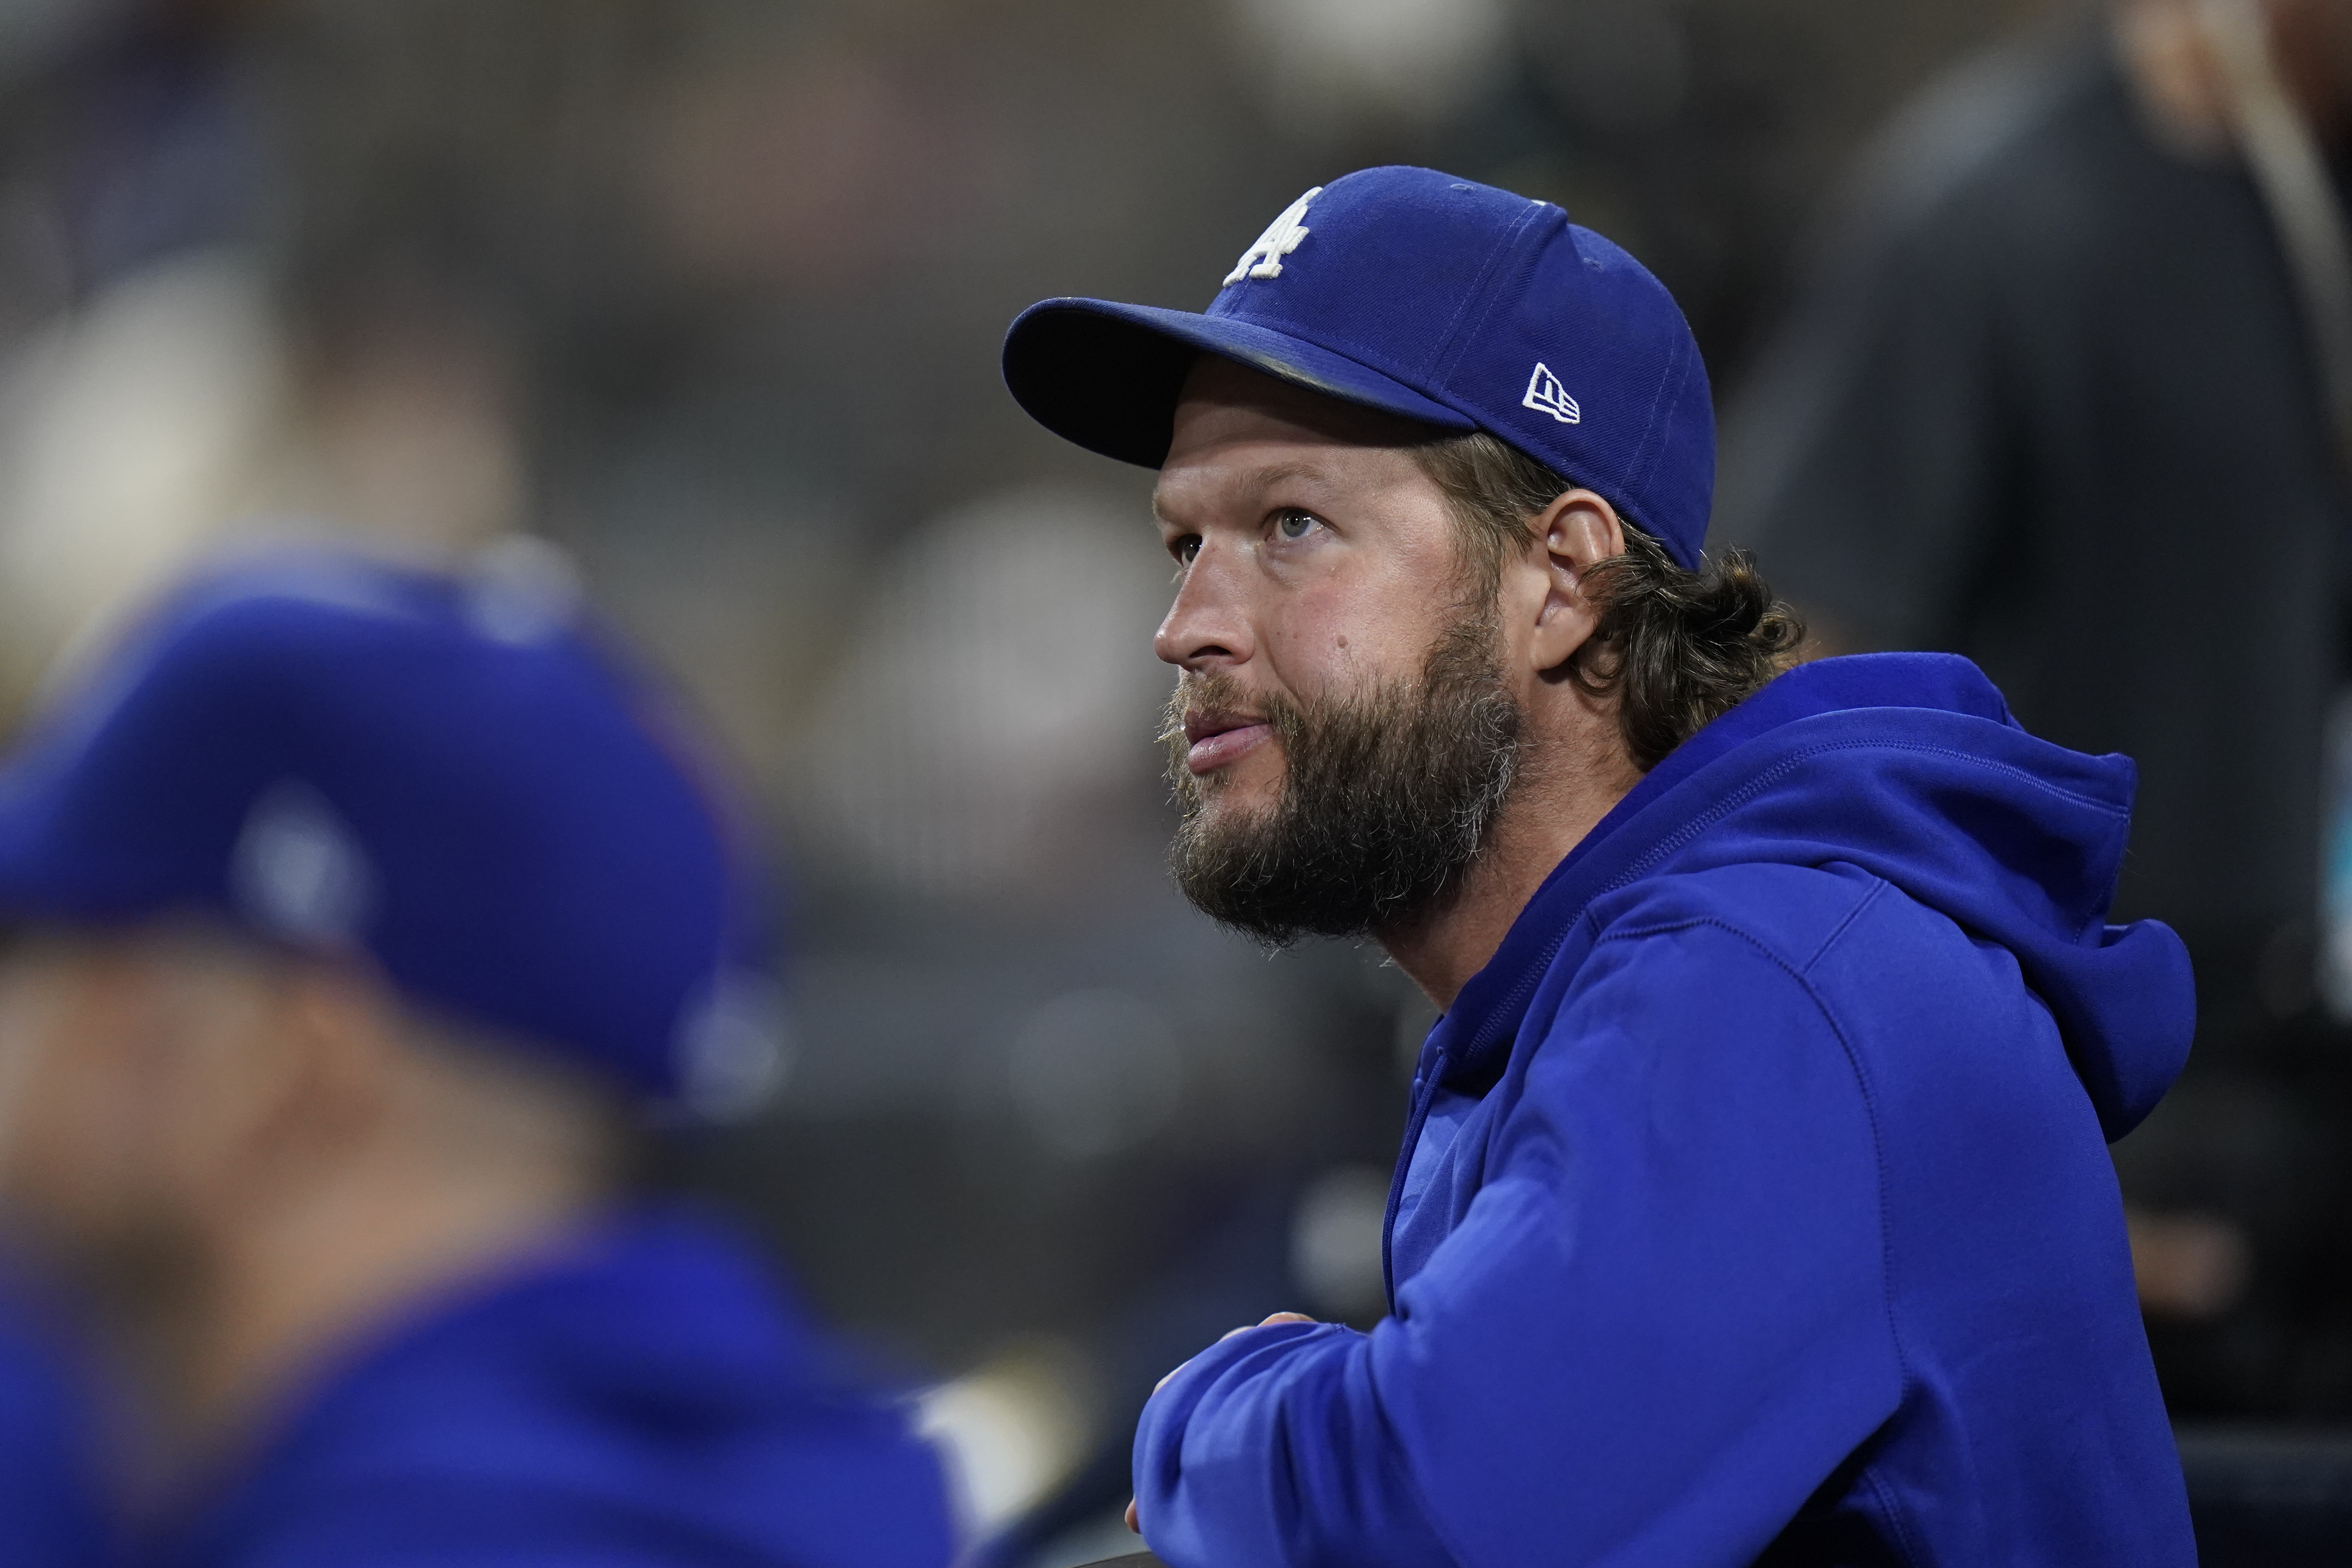 Could Clayton Kershaw's run give him ambitious ideas for Rangers